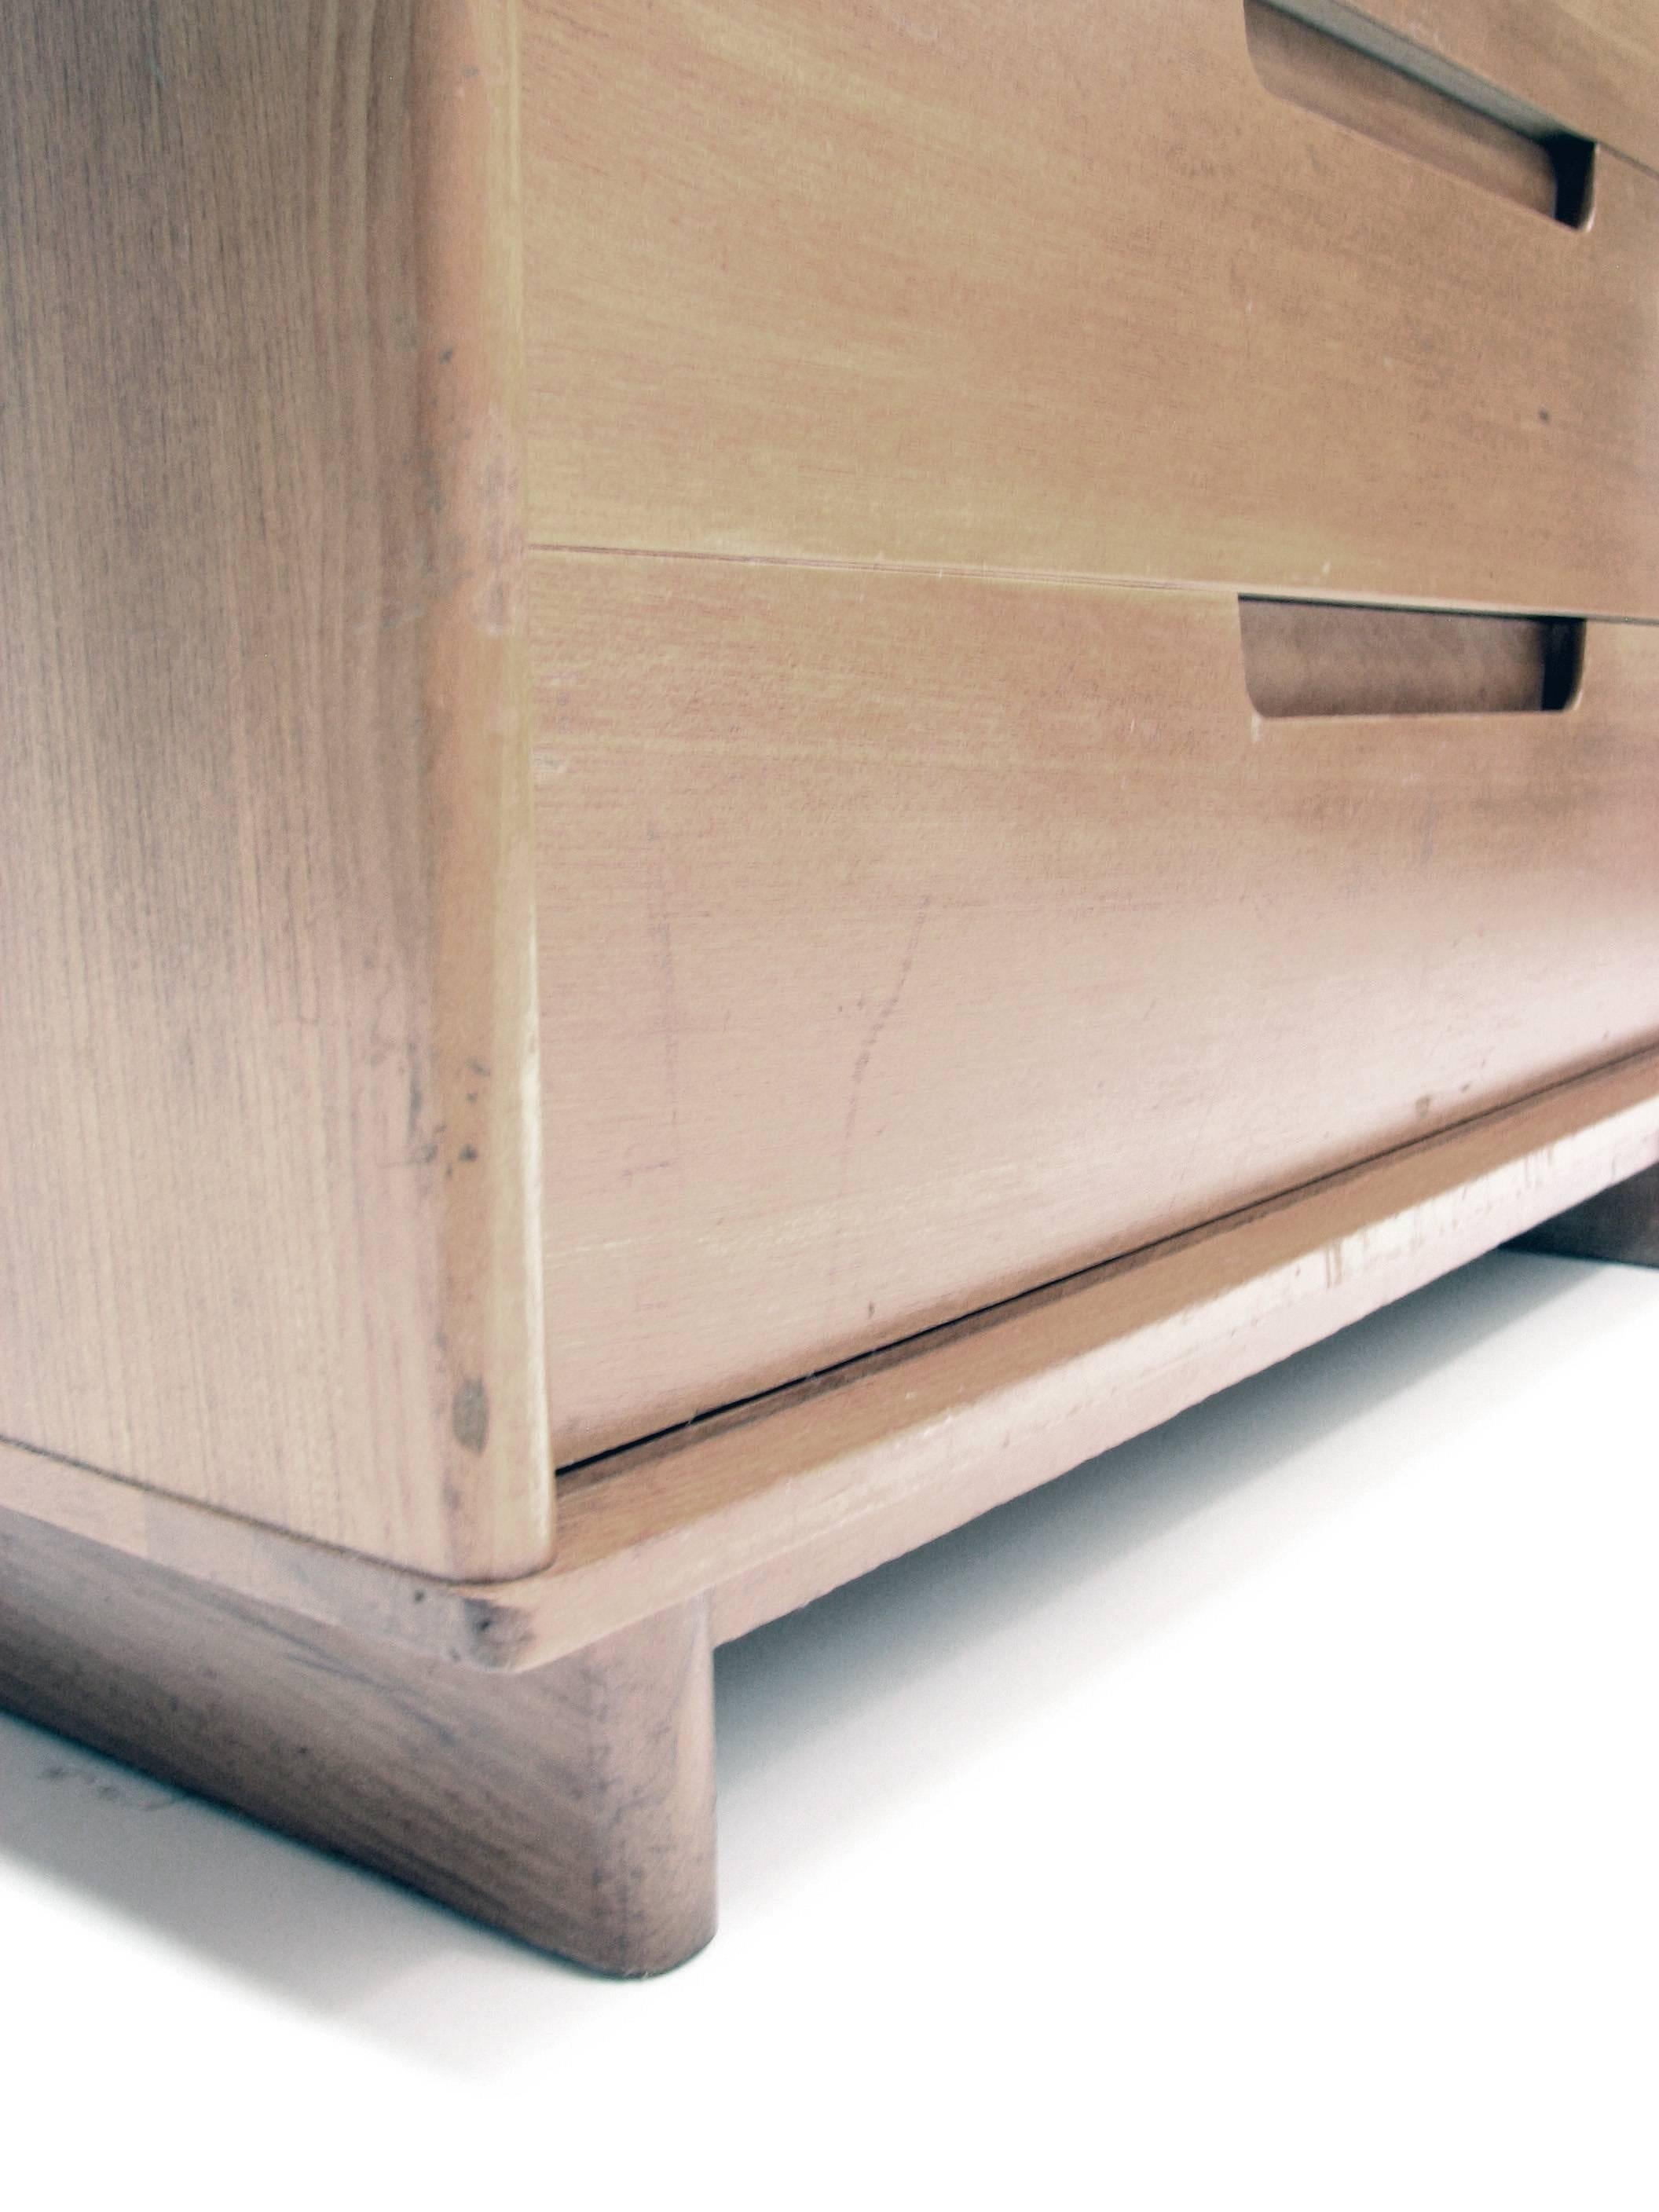 Elm Mid-Century Chest of Drawers by Milo Baughman for Drexel “Today’s Living”